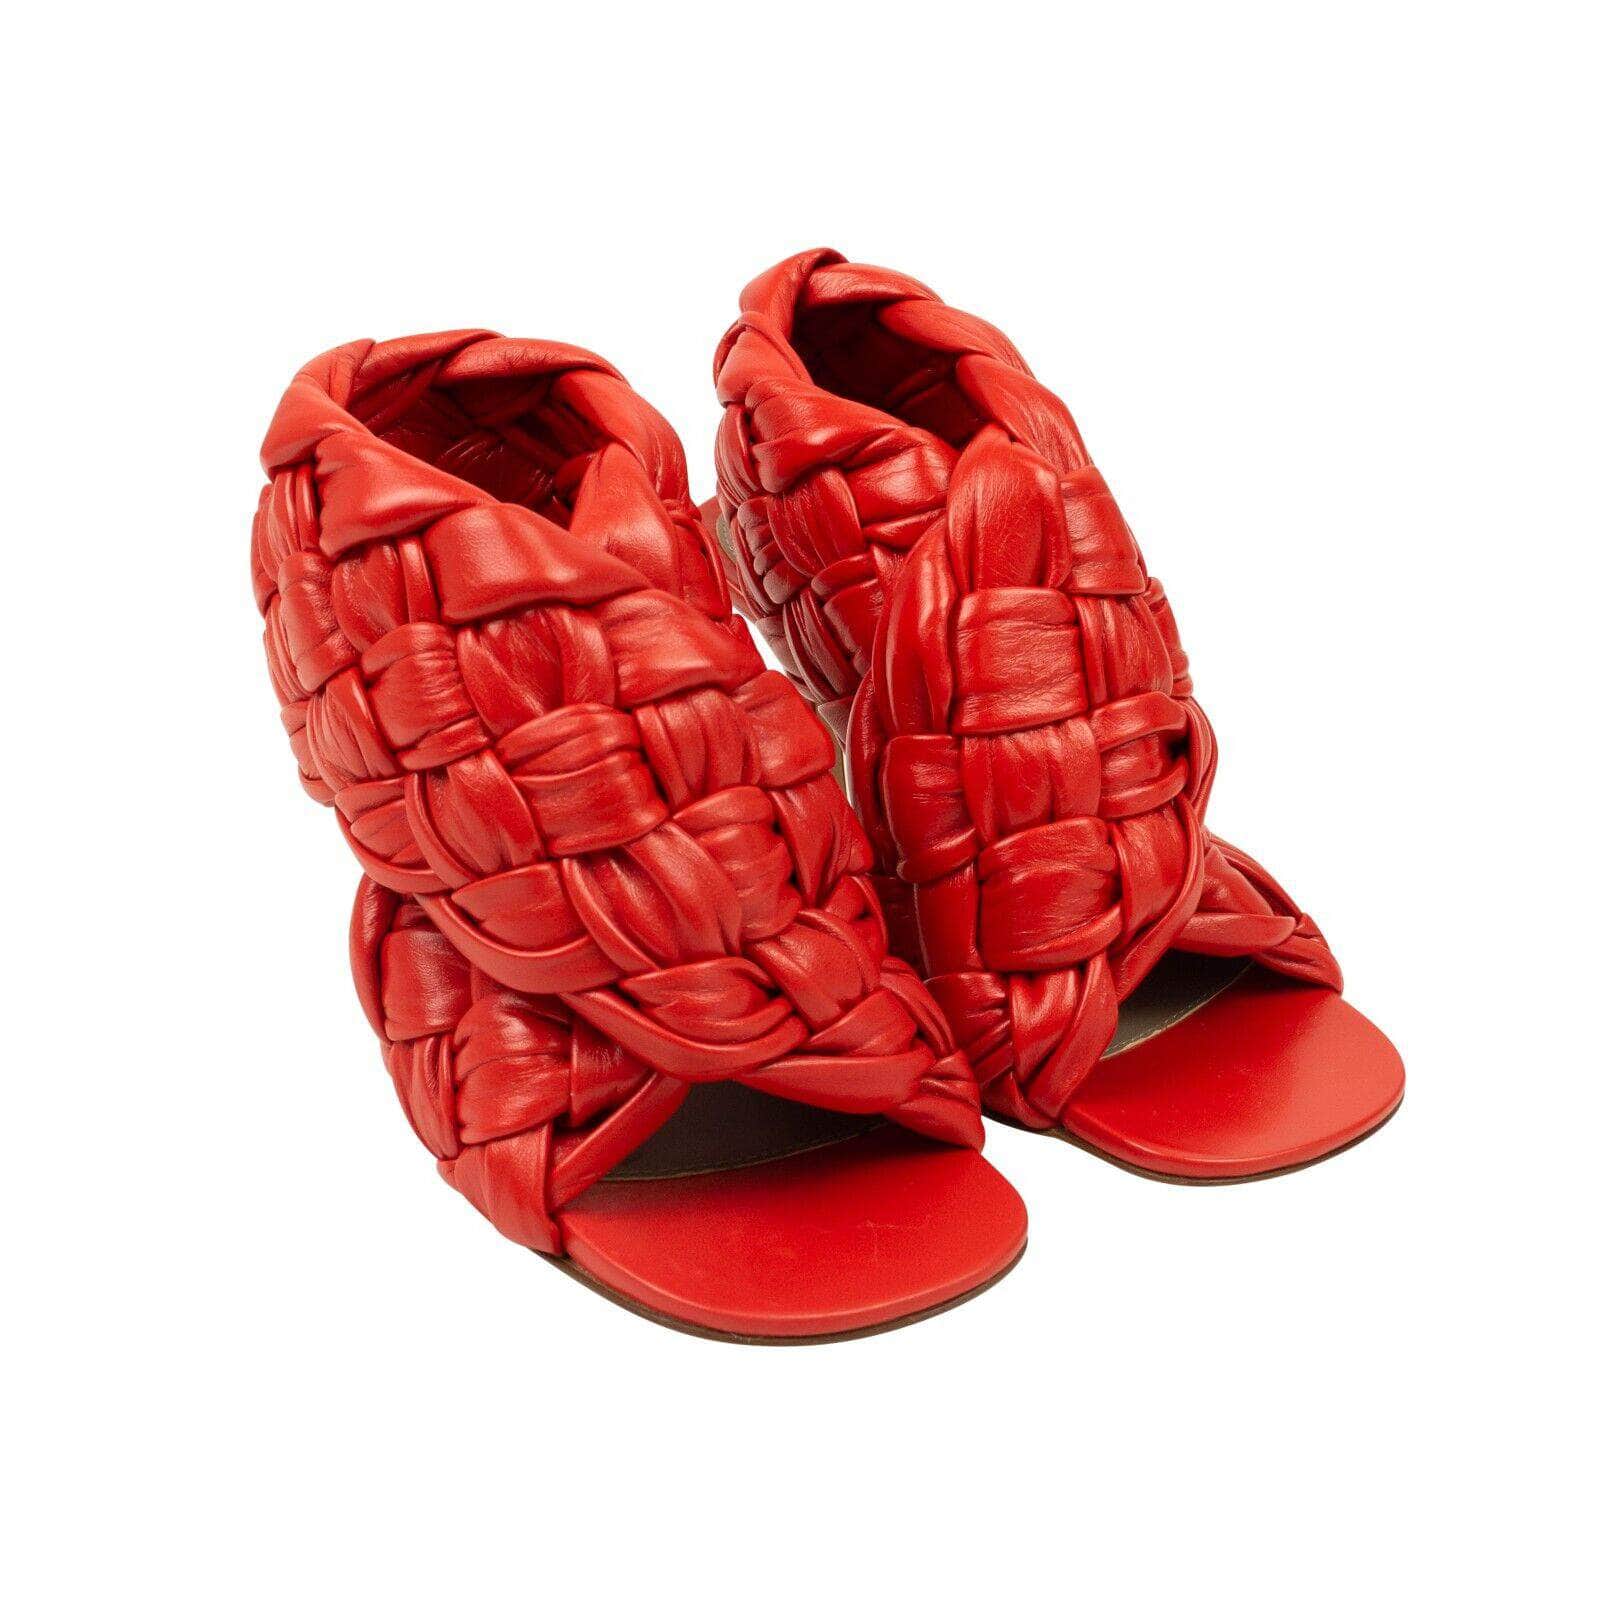 Bottega Veneta 1000-2000, bvc1, channelenable-all, chicmi, couponcollection, gender-womens, main-shoes, size-37, size-37-5, womens-pumps-heels Red Leather The Board Heeled Sandals